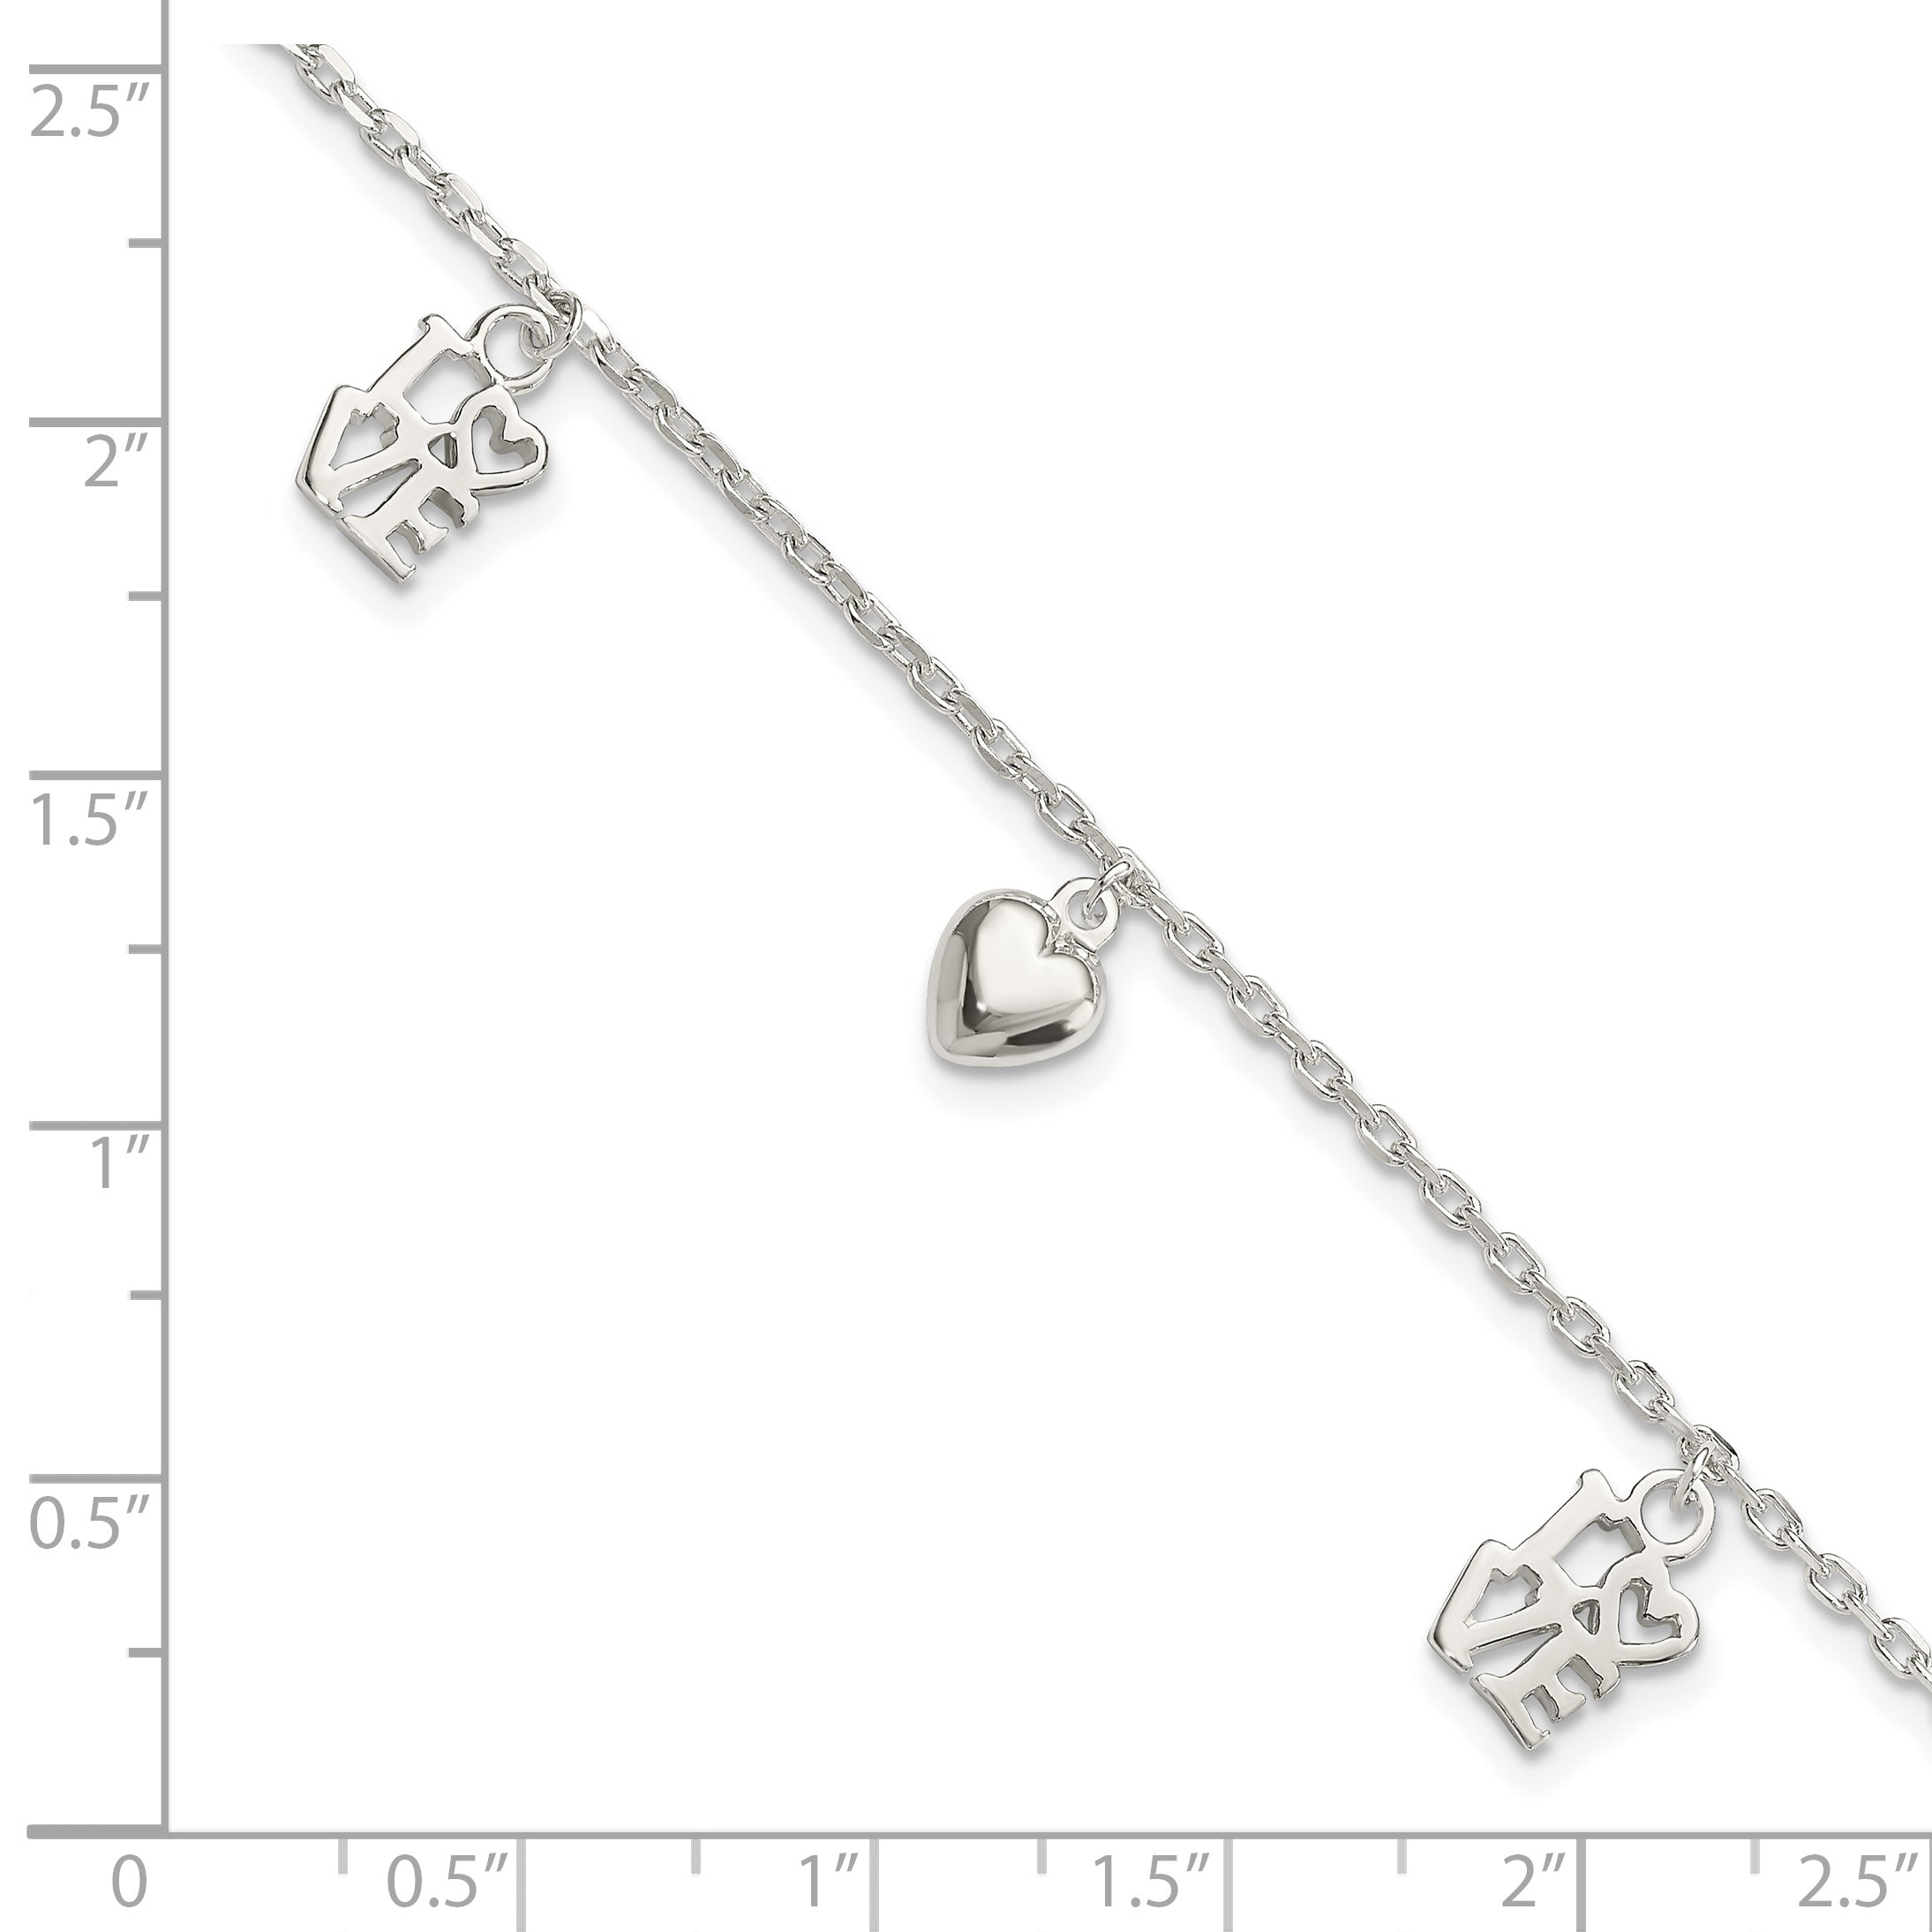 Sterling Silver Heart and LOVE Charm Bracelet